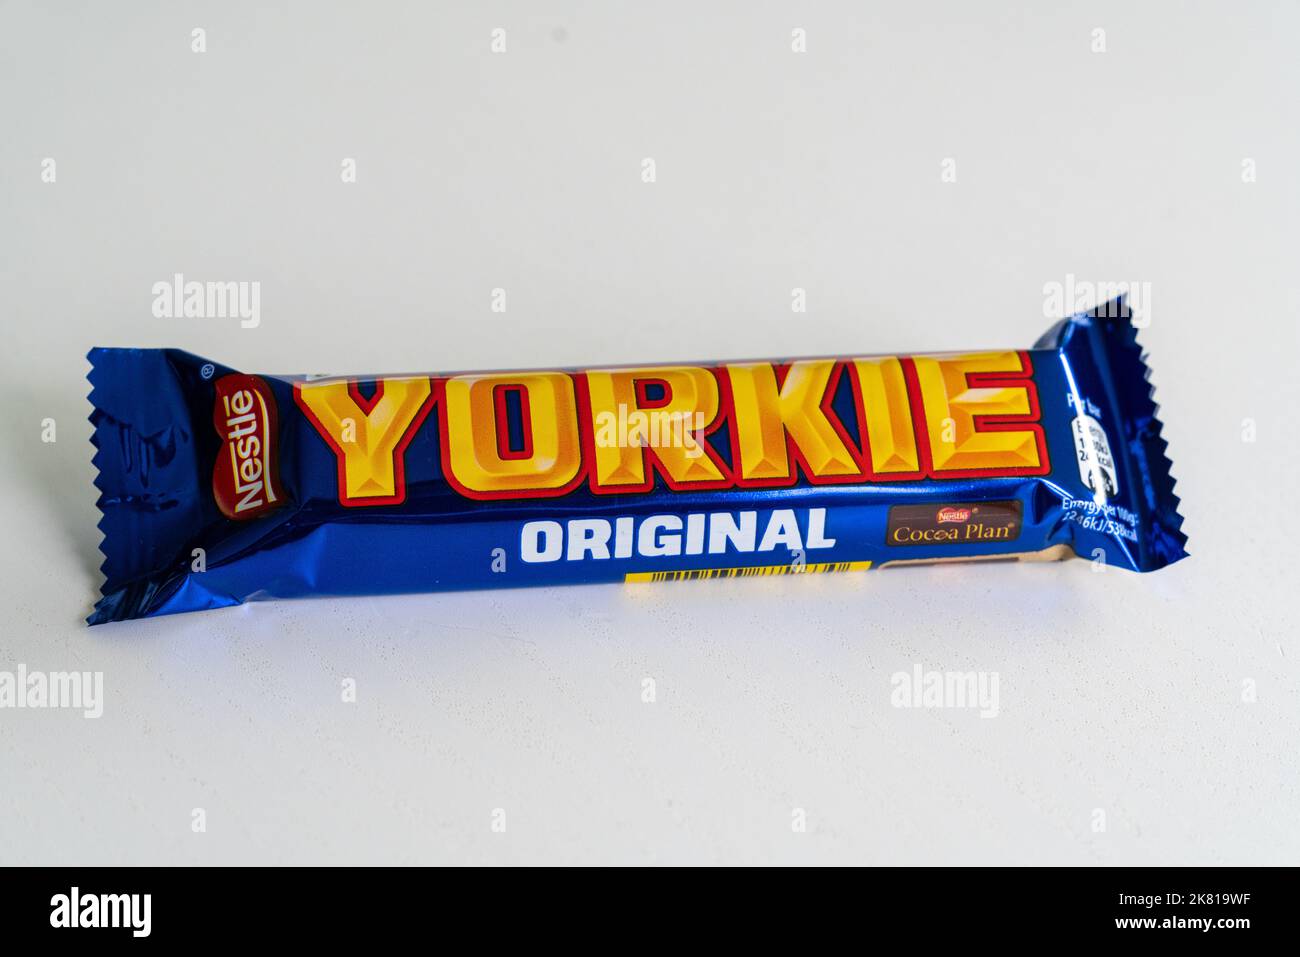 A Yorkie Original chocolate bar made by the Nestle Corporation pictured on plain background in October 2022 Stock Photo